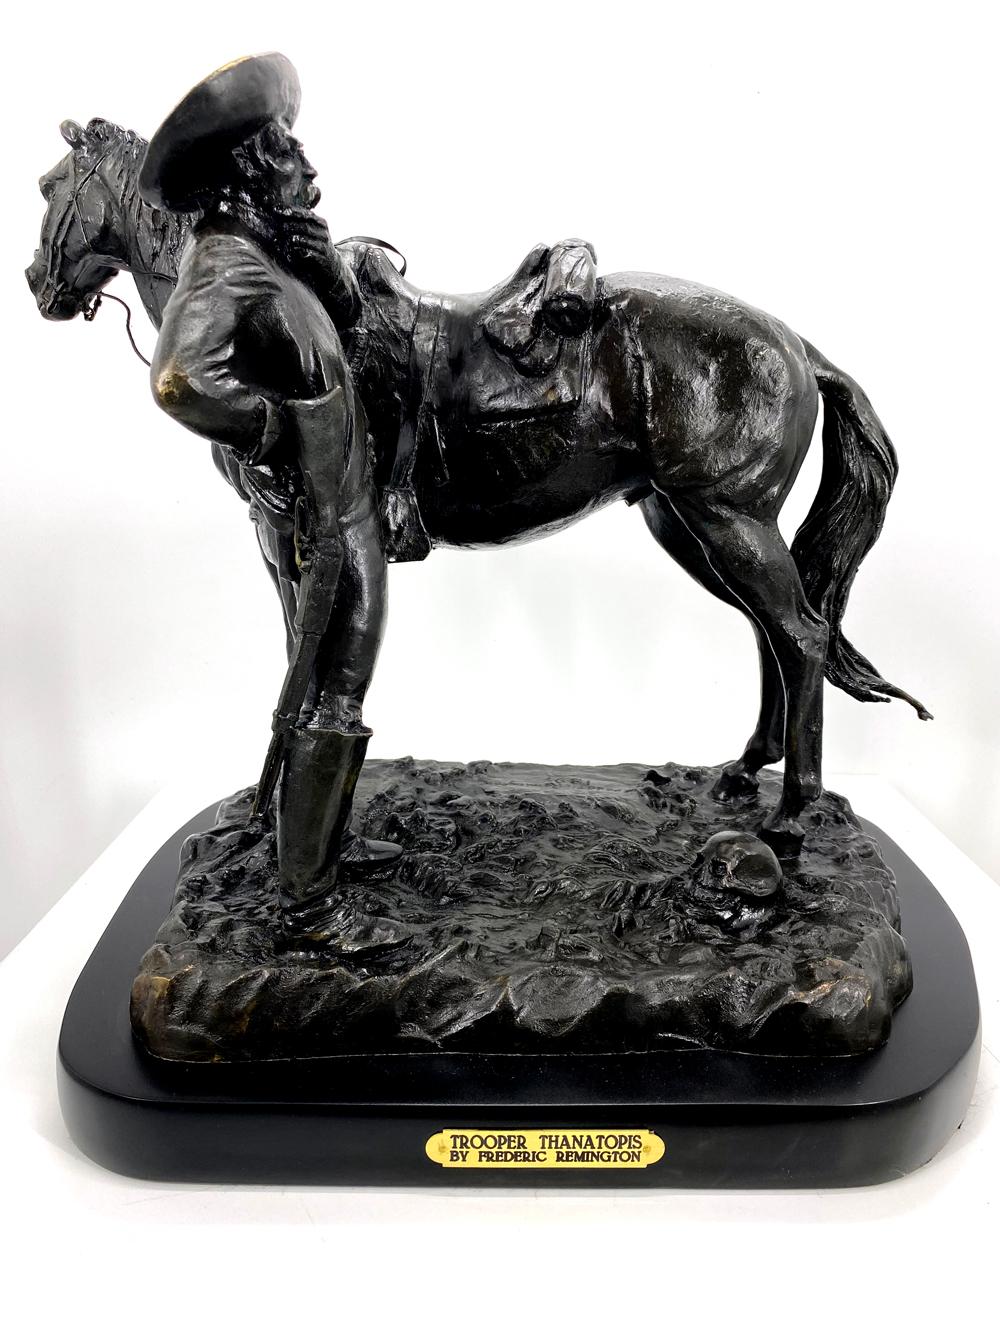 *Very Rare Large Trooper Thanatopis Bronze by Frederic Remington 20'''' x 22'''' - Great Investment